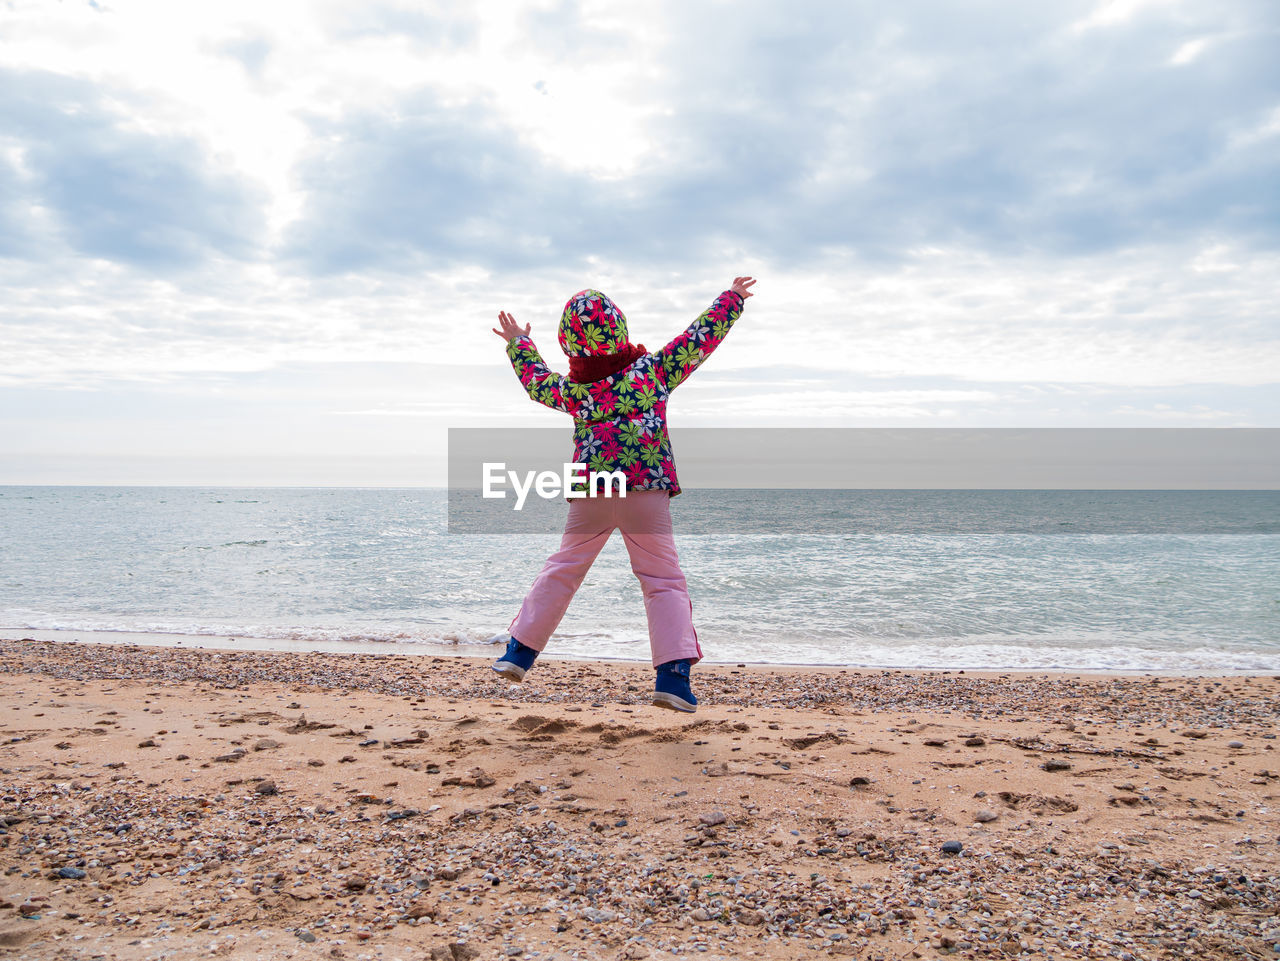 Little girl jumping on empty beach flying in the air lifestyle people scenic landscape active family